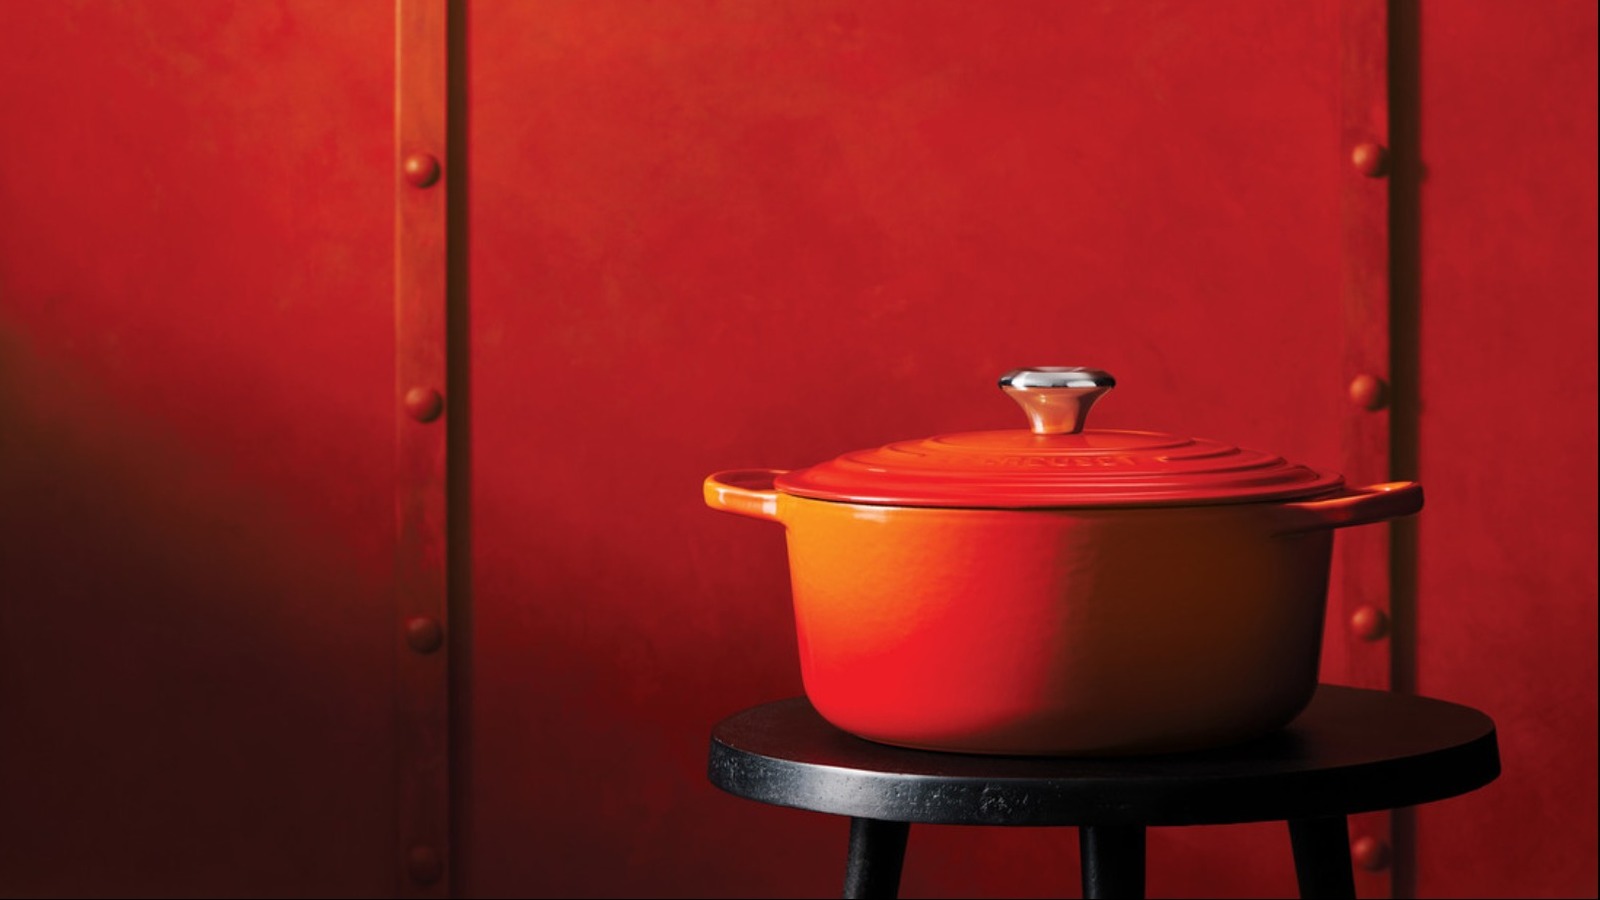 https://www.mashed.com/img/gallery/the-untold-truth-of-le-creuset/l-intro-1607935478.jpg